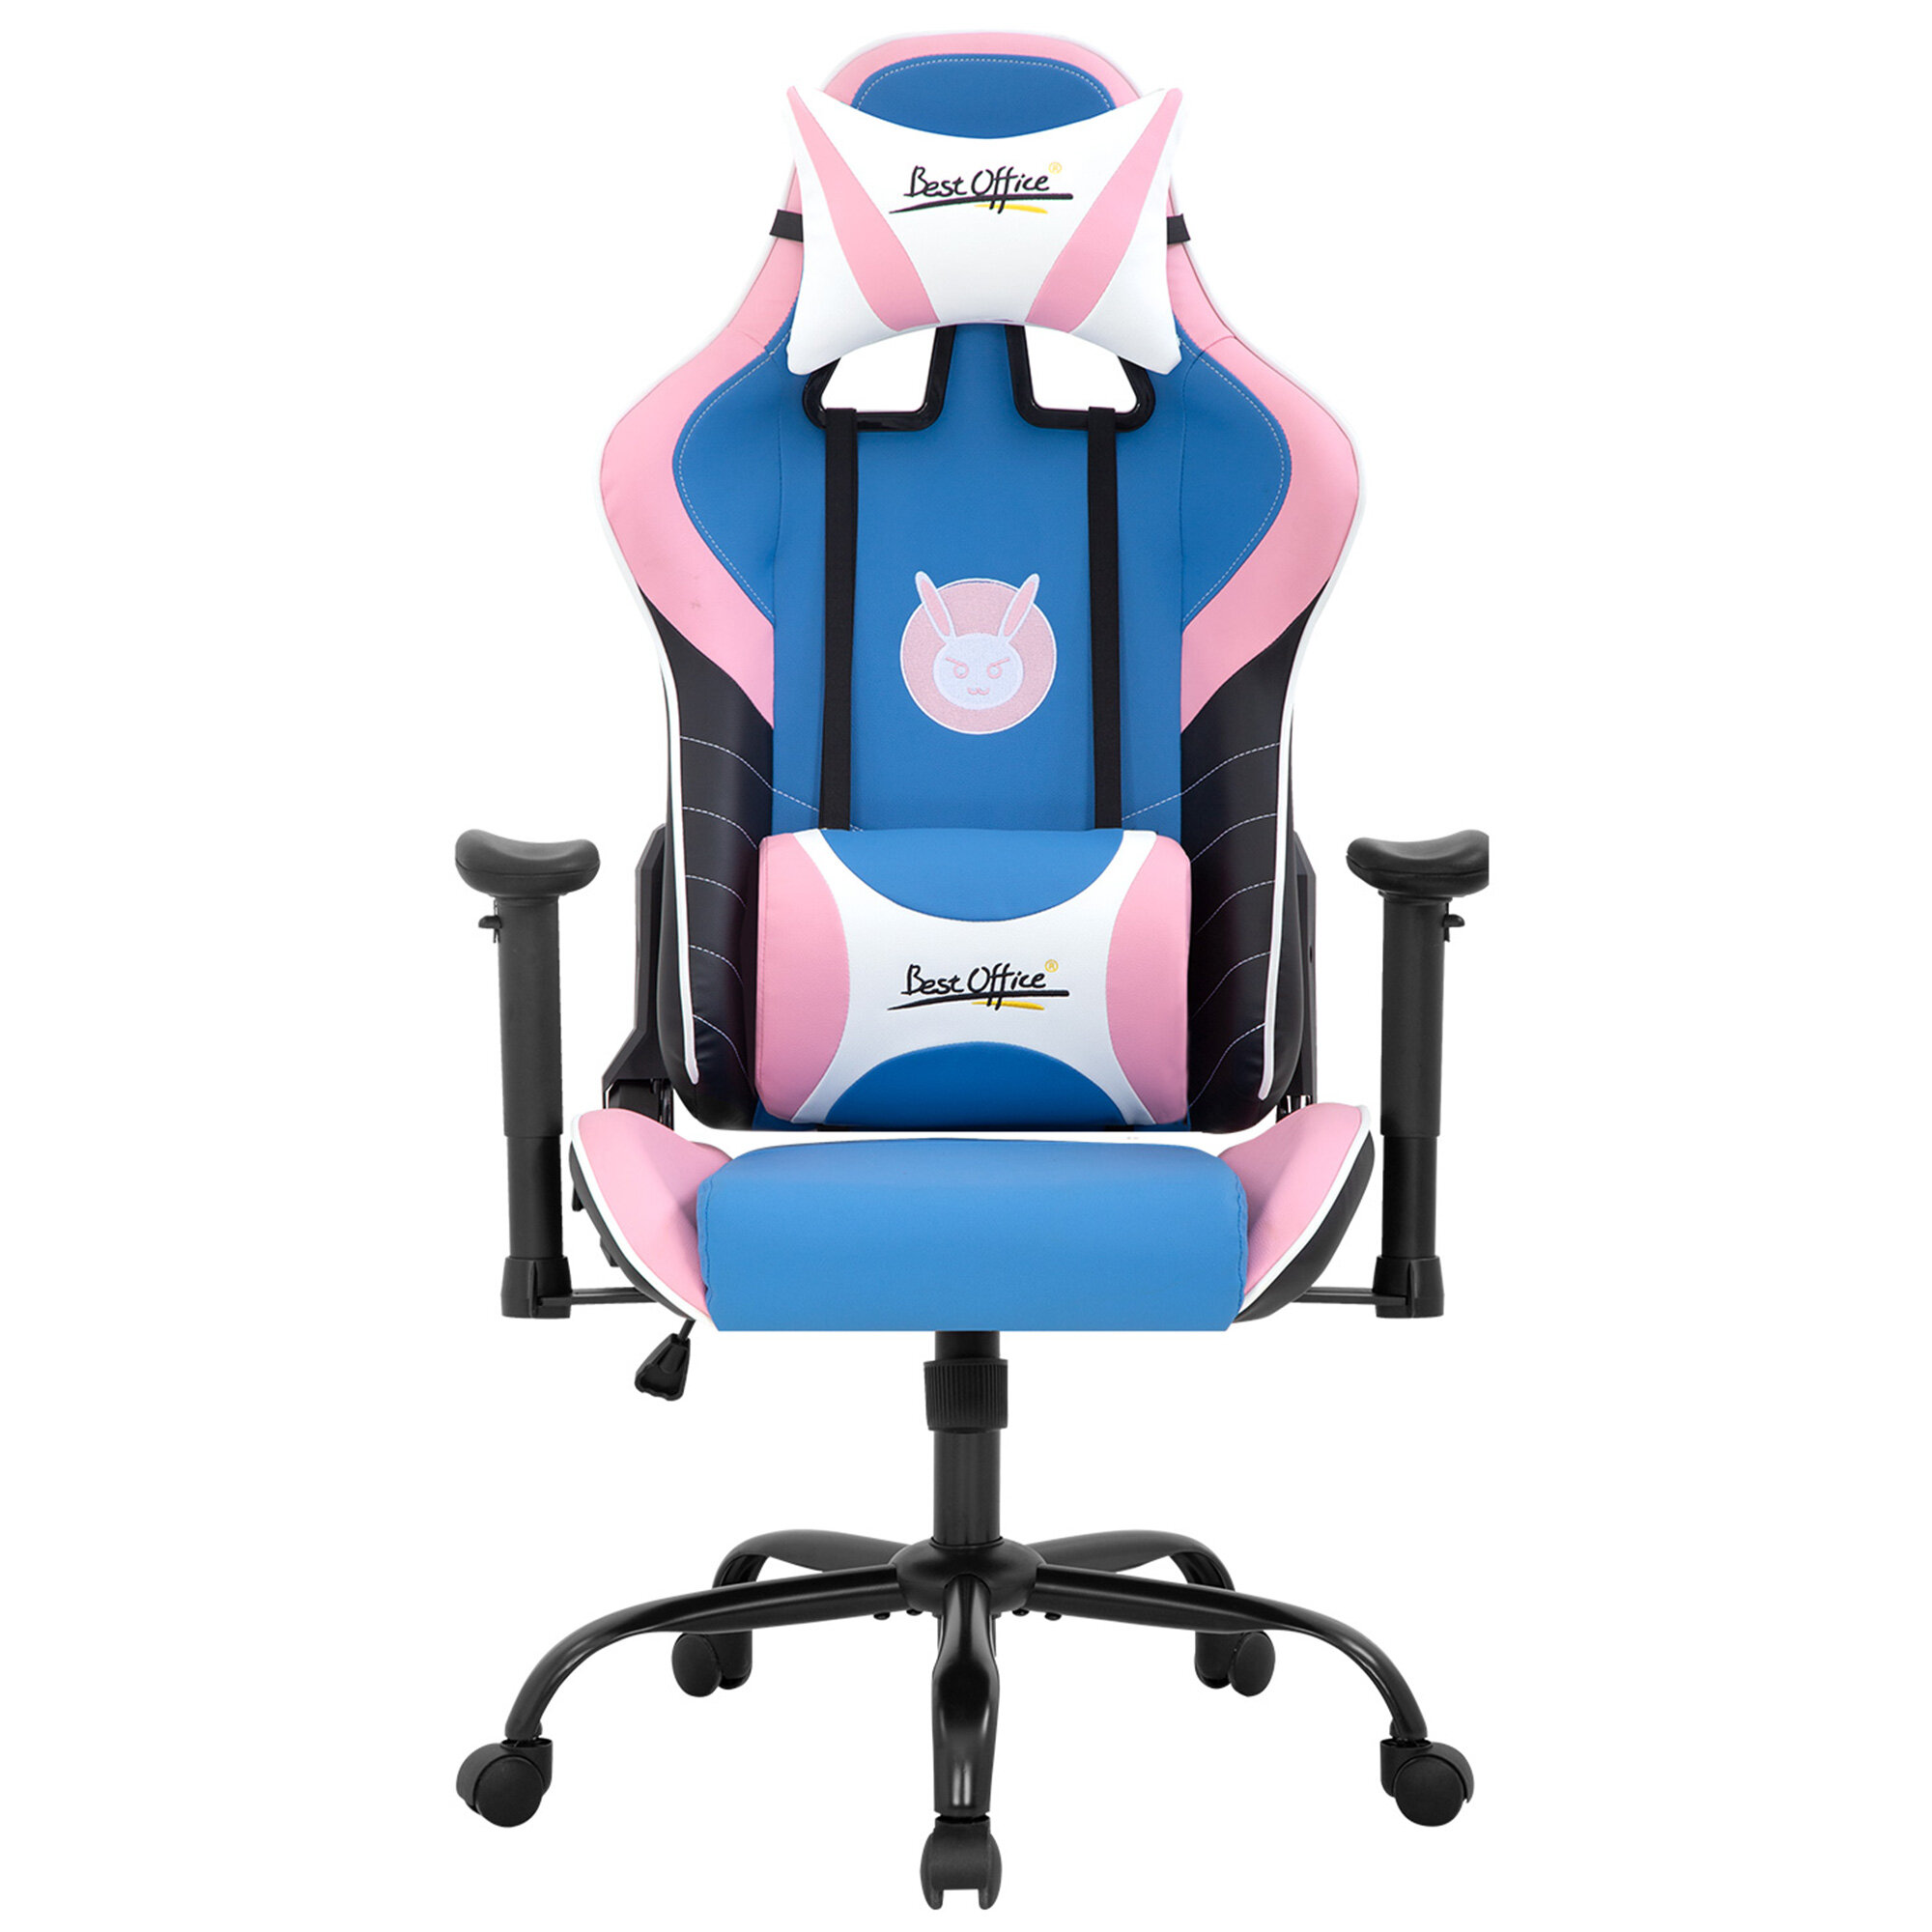 Support Desk Supplies New Chair Ergonomic Seat Computers Adjustable Home Gaming 